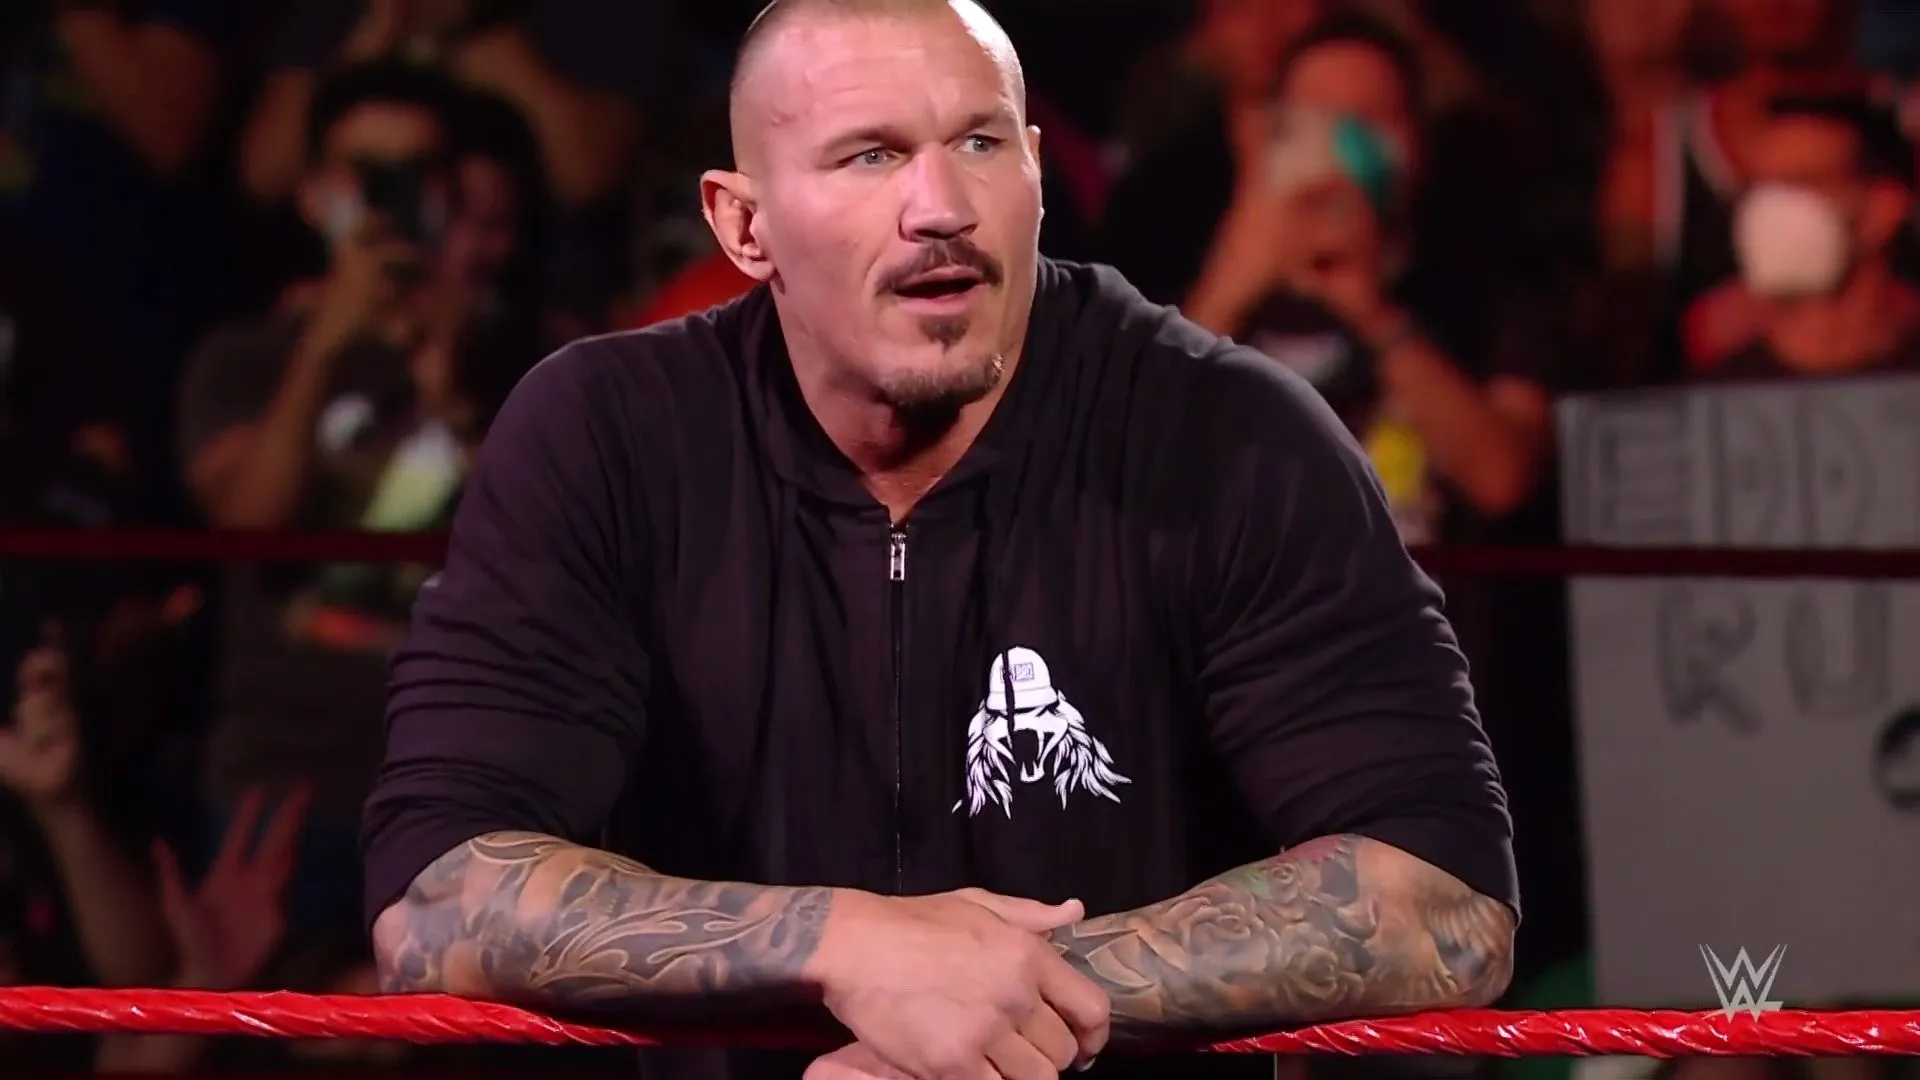 Randy Orton's Family Support and Potential WrestleMania Showdown: Inside WWE's Latest Drama